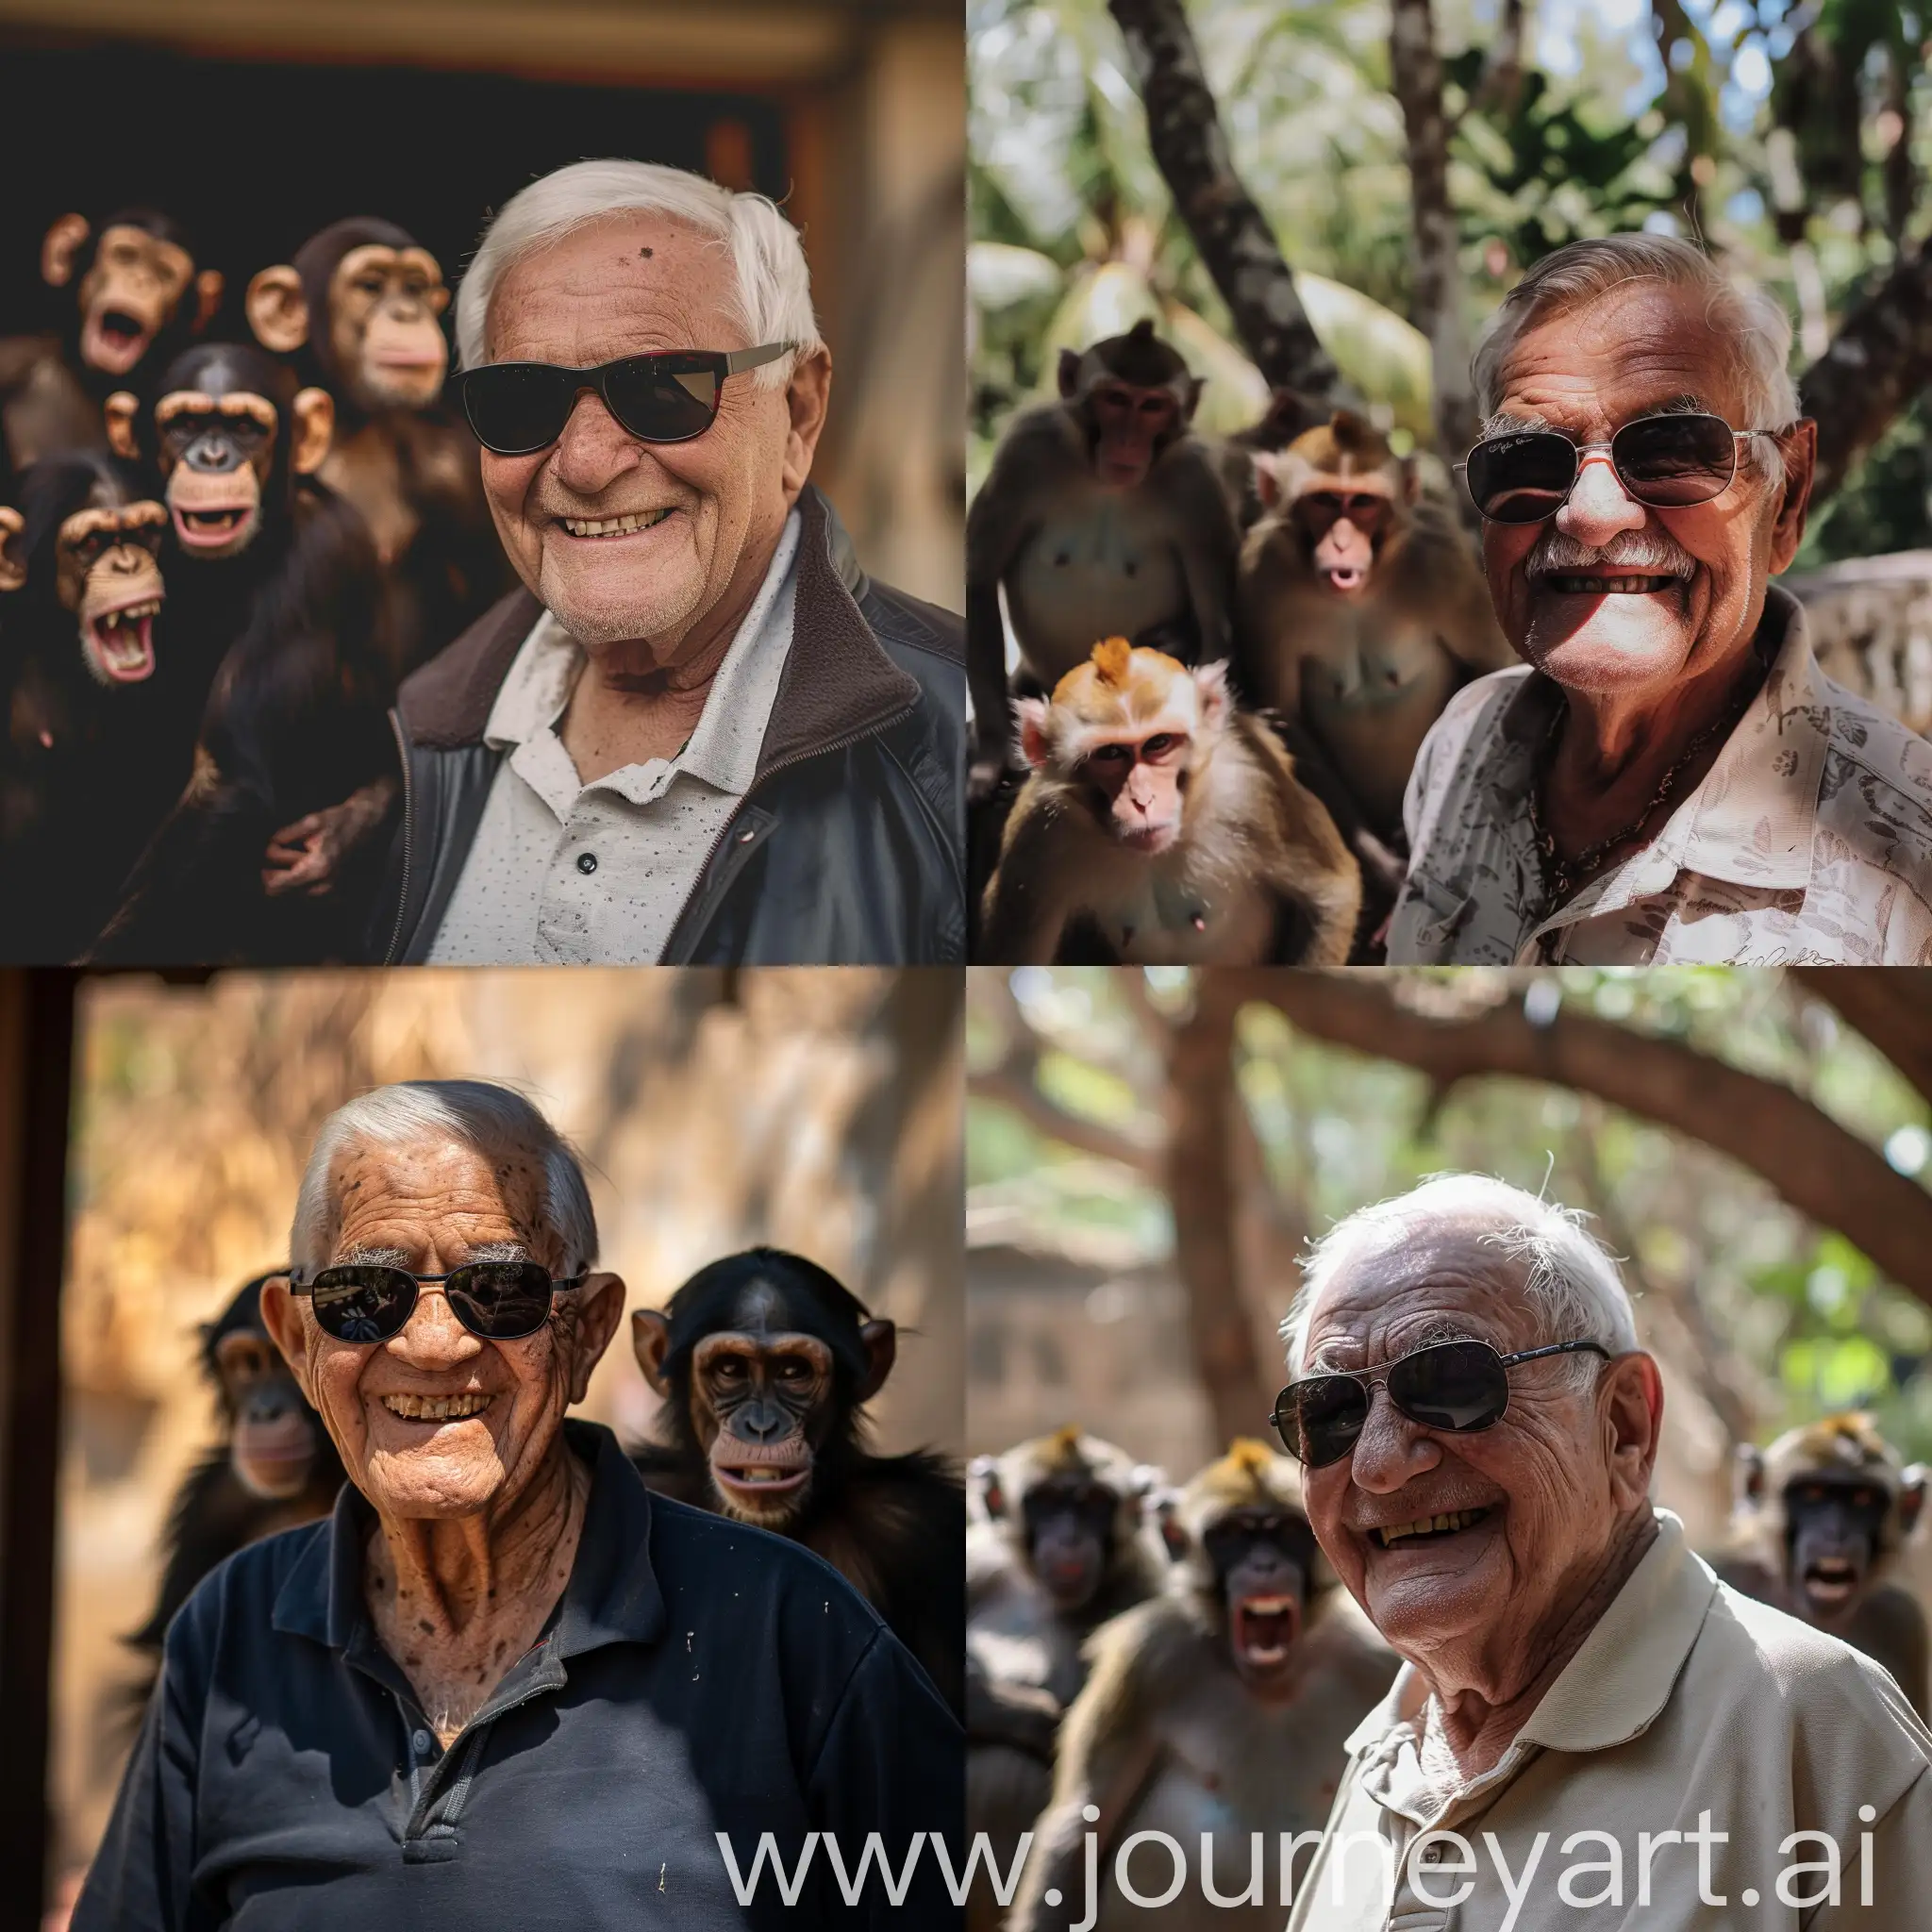 Smiling-Grandpa-with-Sunglasses-Surrounded-by-Angry-Monkeys